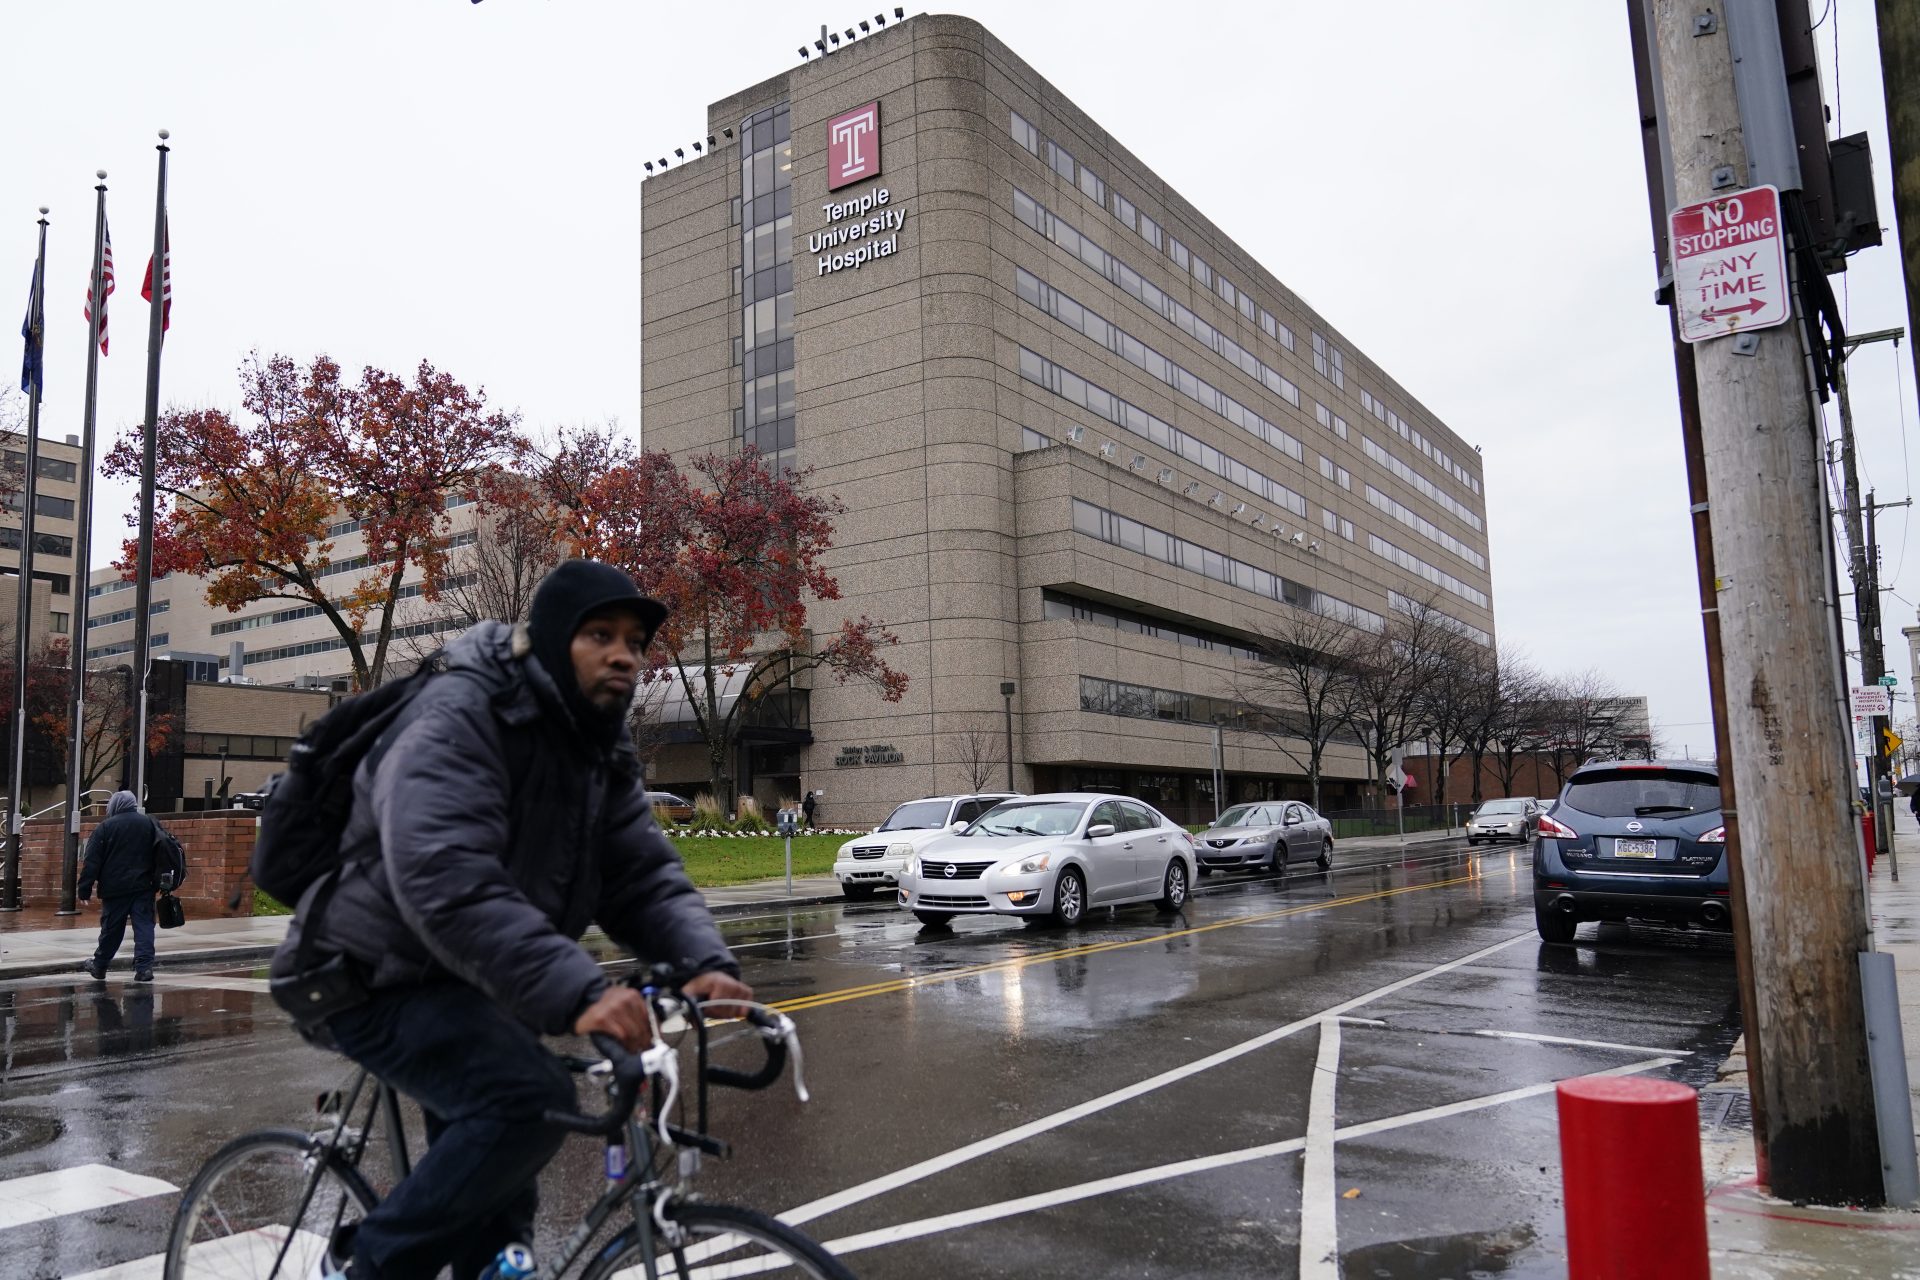 A man rides a bicycle past Temple University Hospital, Friday, Dec. 4, 2020, in Philadelphia. Hospital beds are filling up and medical staffs are being stretched to the limit as Pennsylvania's health care system copes with a growing number of seriously ill COVID-19 patients.